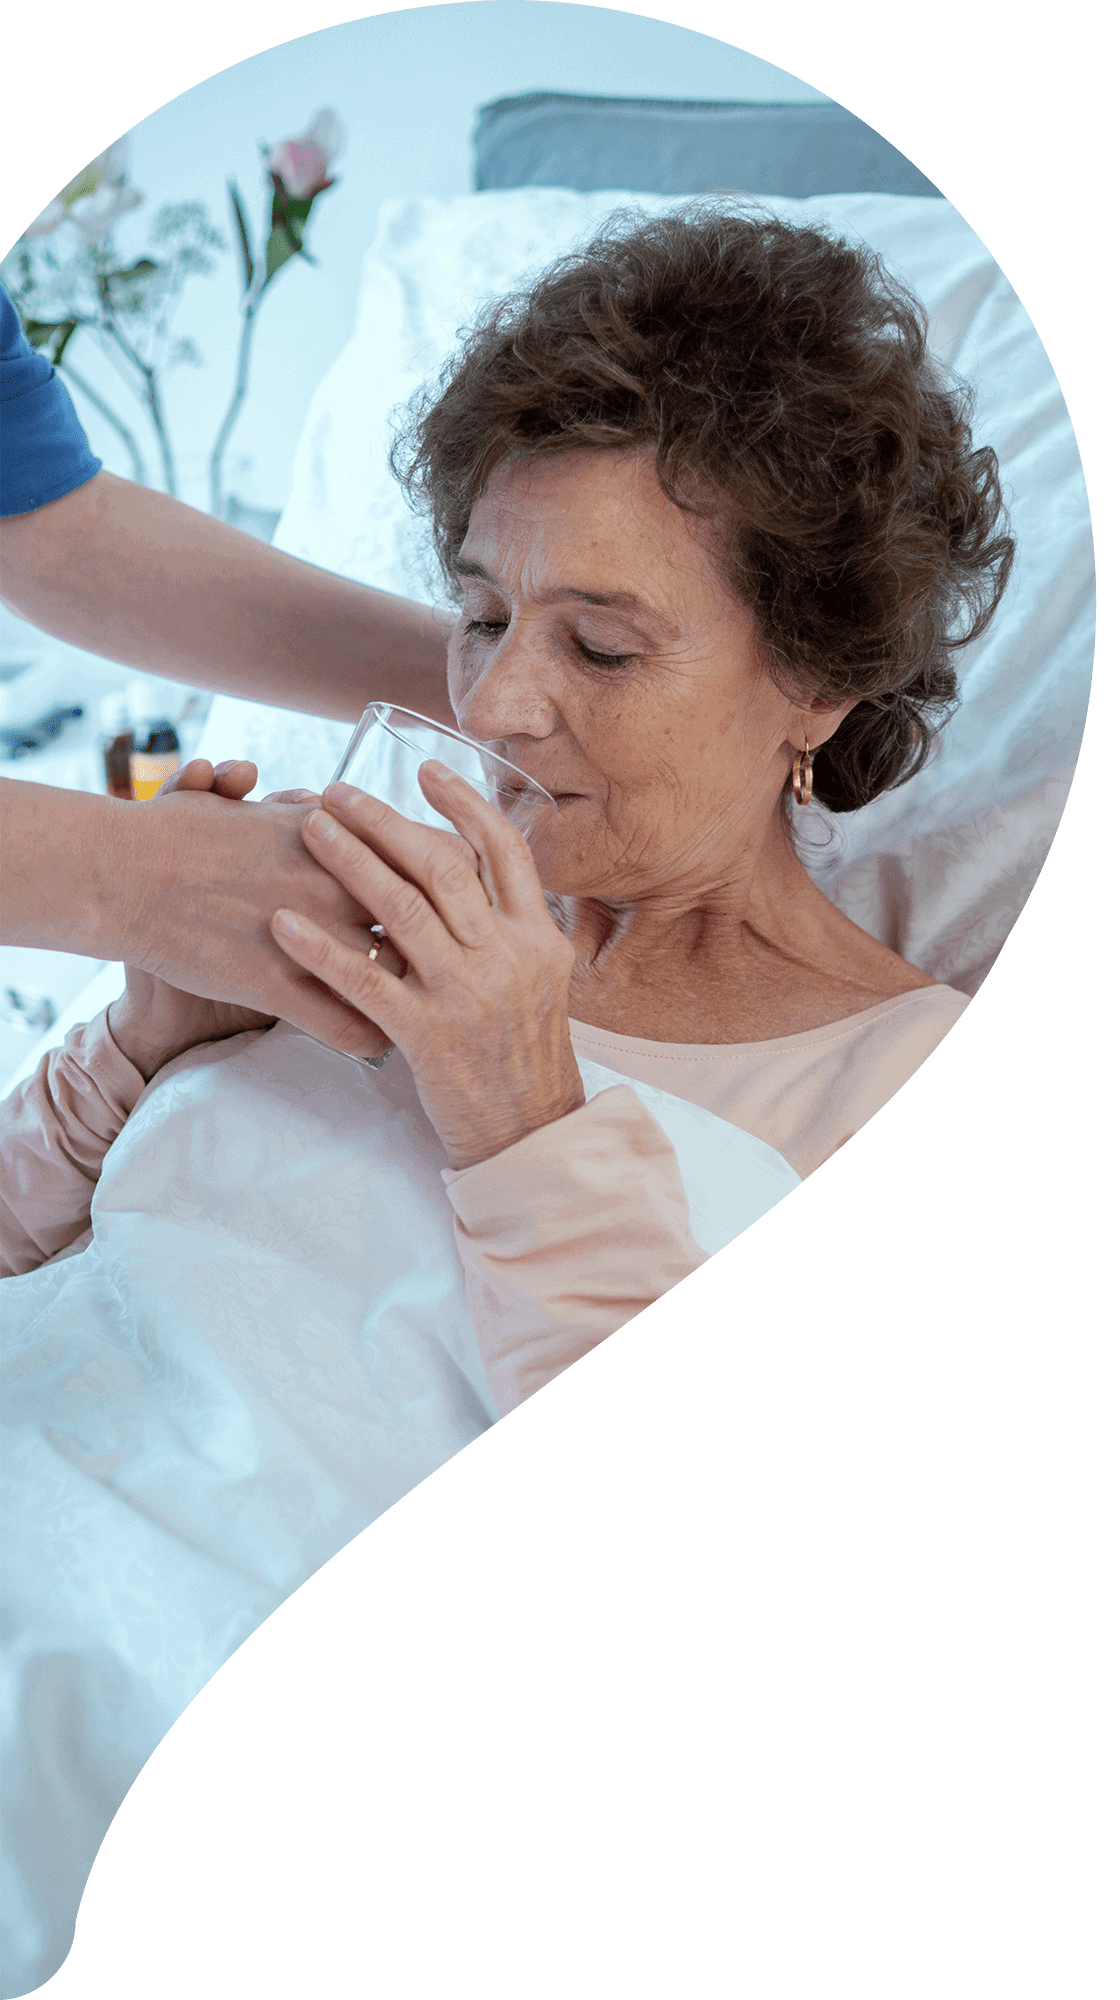 nurse helping senior patient drink water: Help Inc. - Everyone is relying on you. You can rely on us.